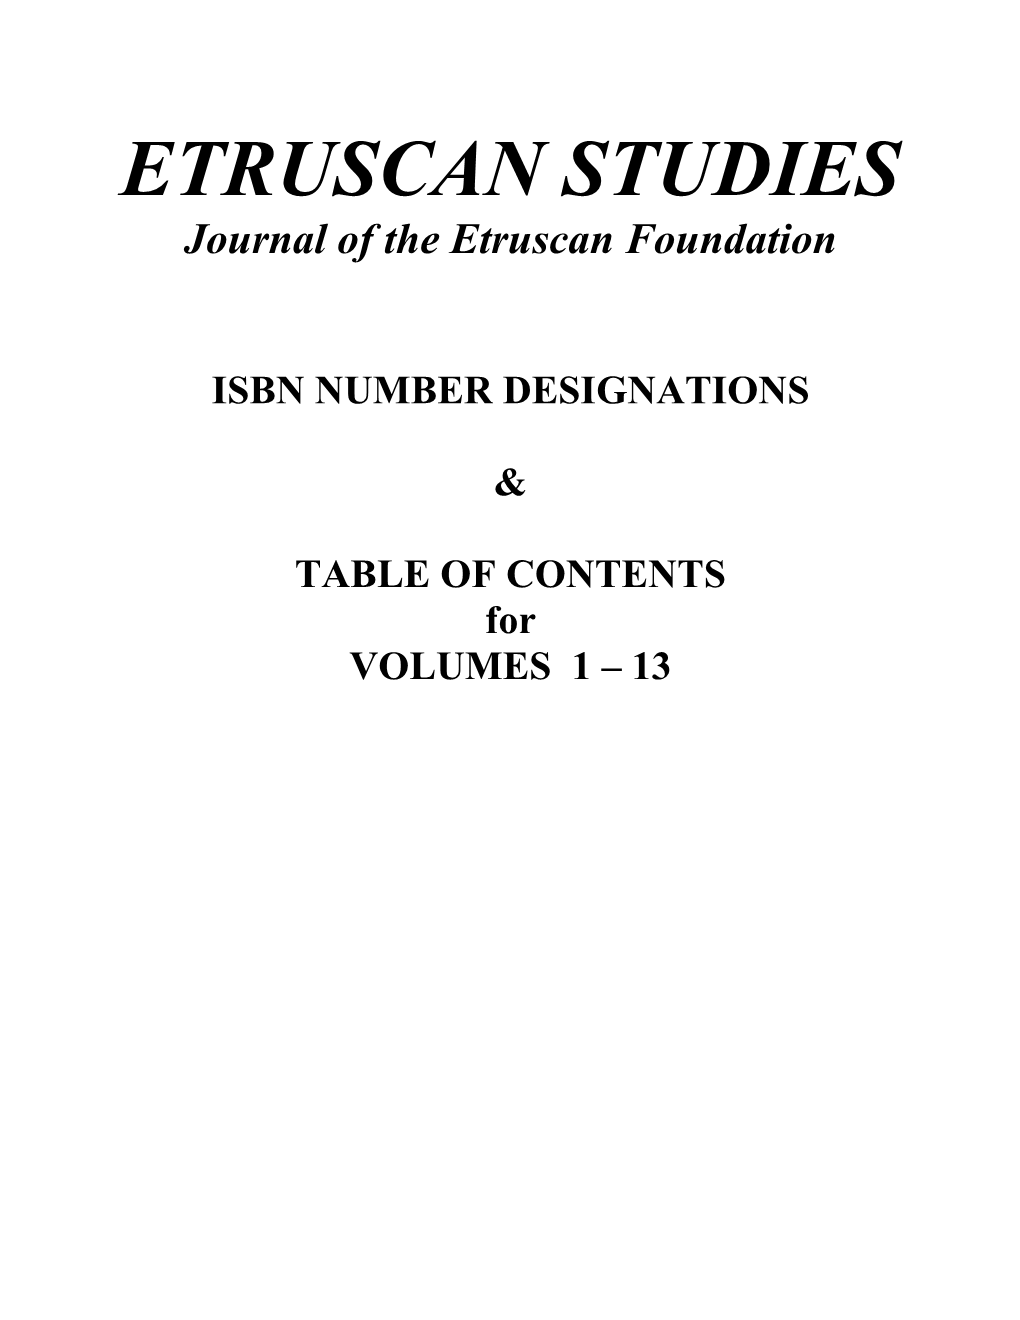 ETRUSCAN STUDIES Journal of the Etruscan Foundation